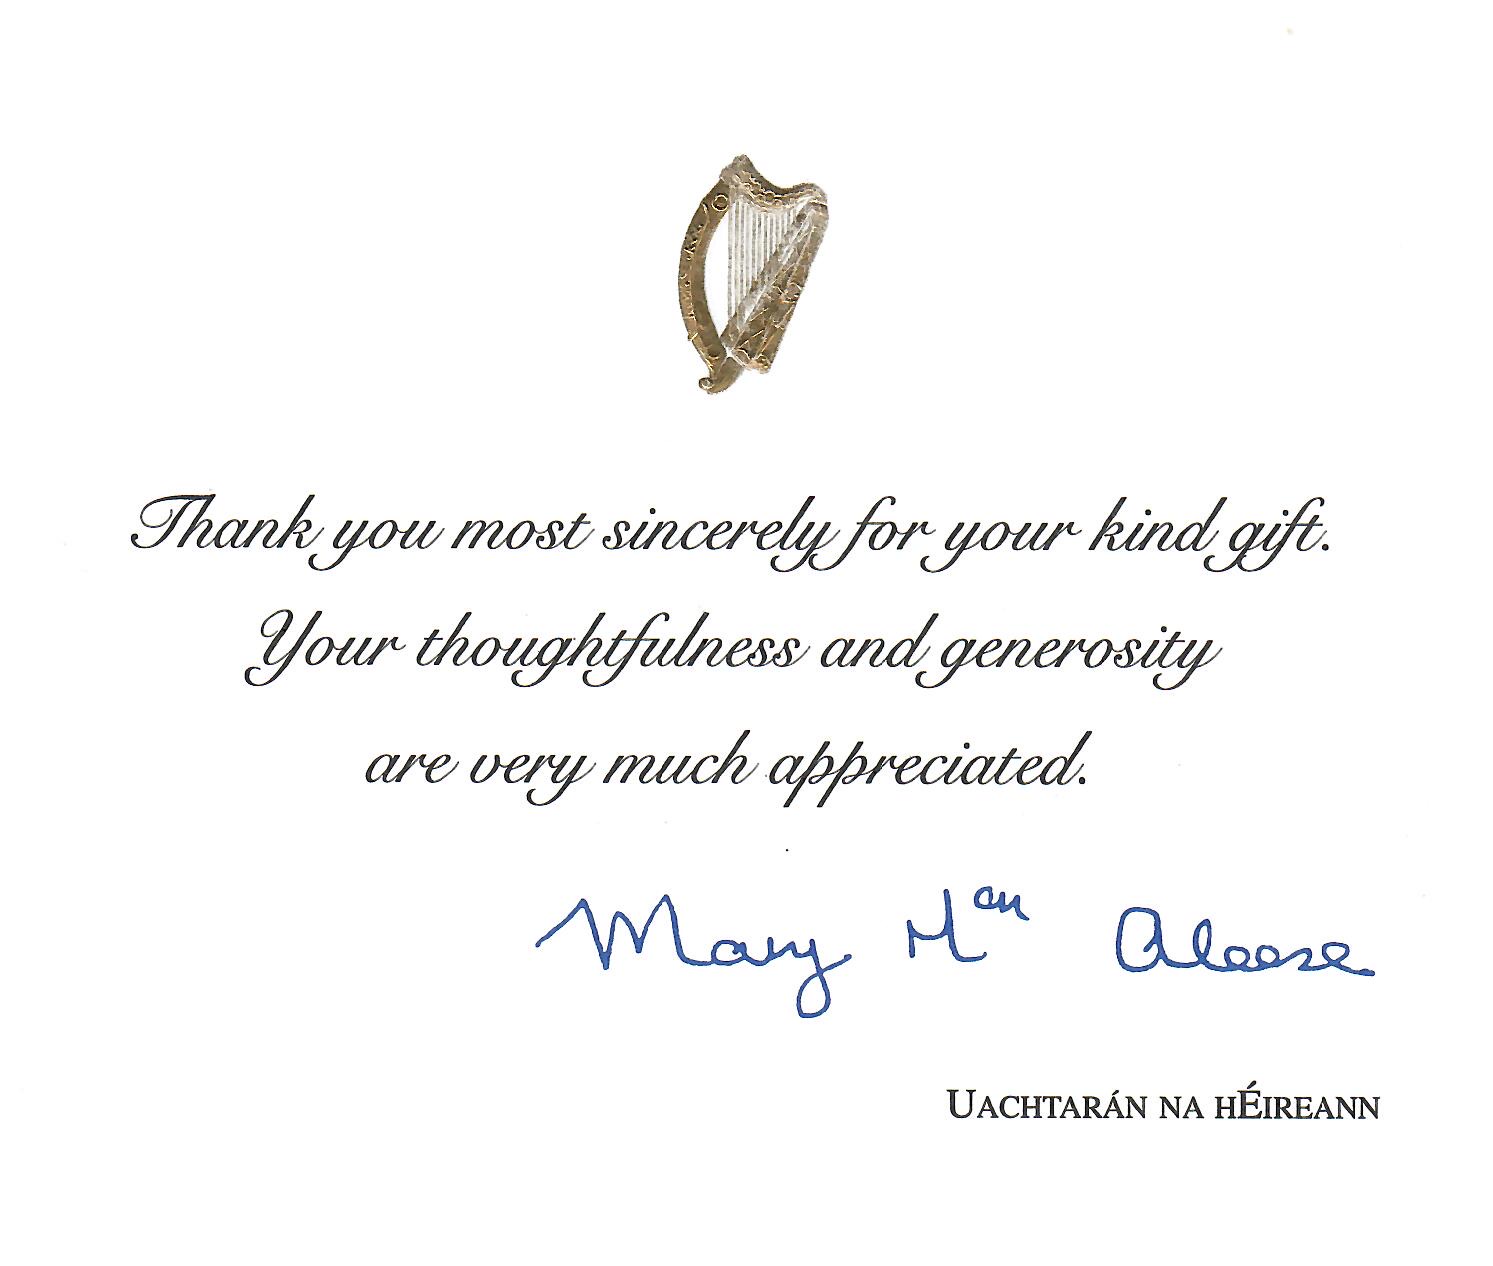 Thank you note from Mary McAleese, President of Ireland (1997-2011)